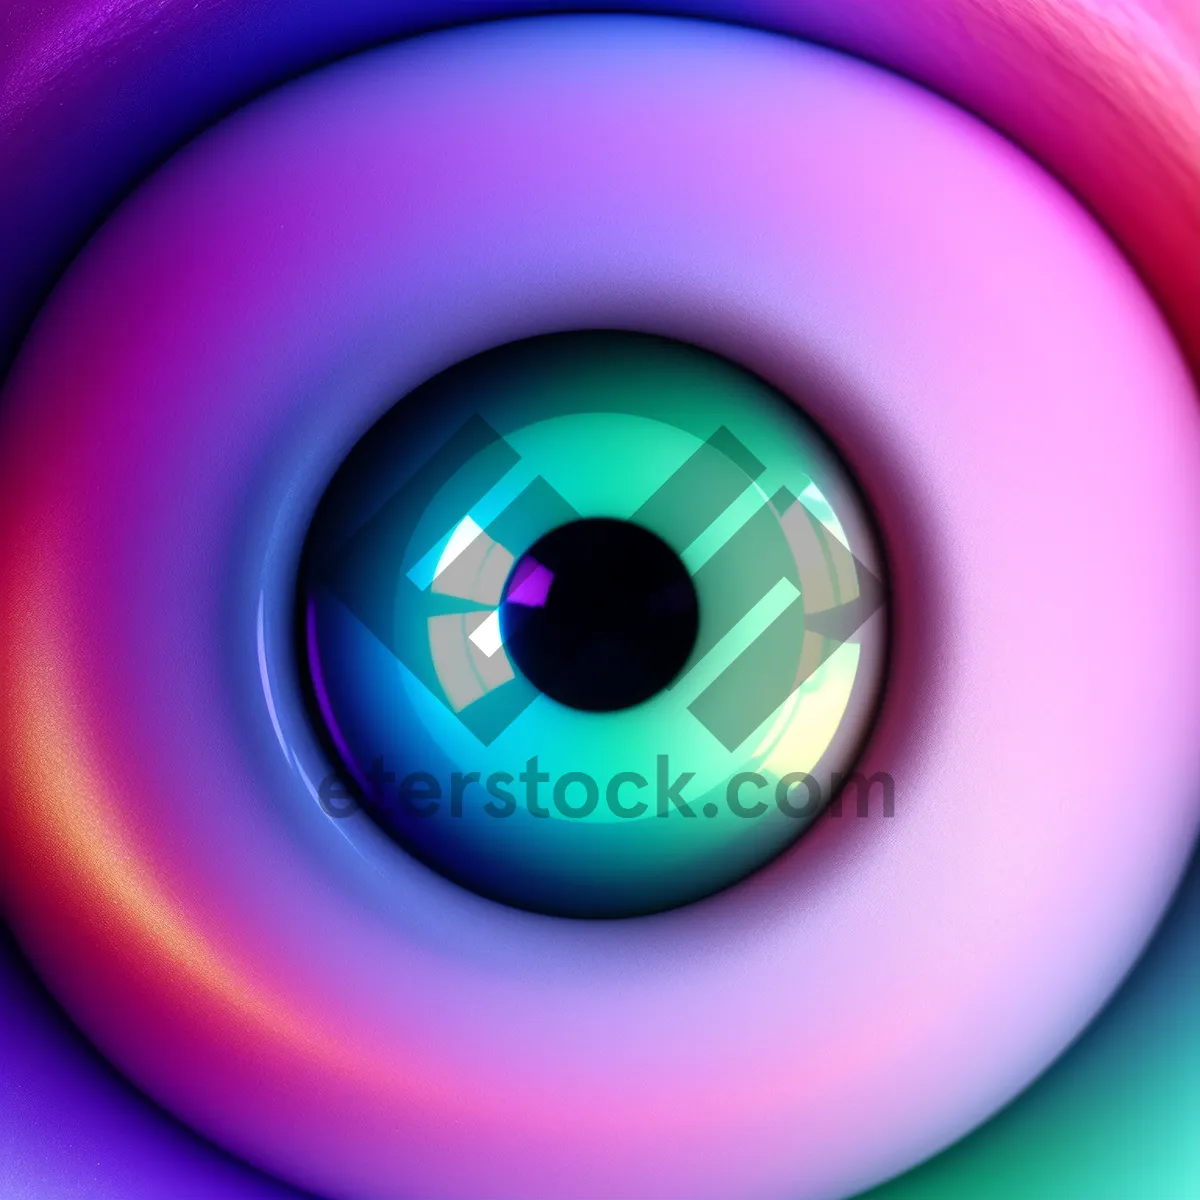 Picture of Shiny Round Graphic Button with Digital Art Design